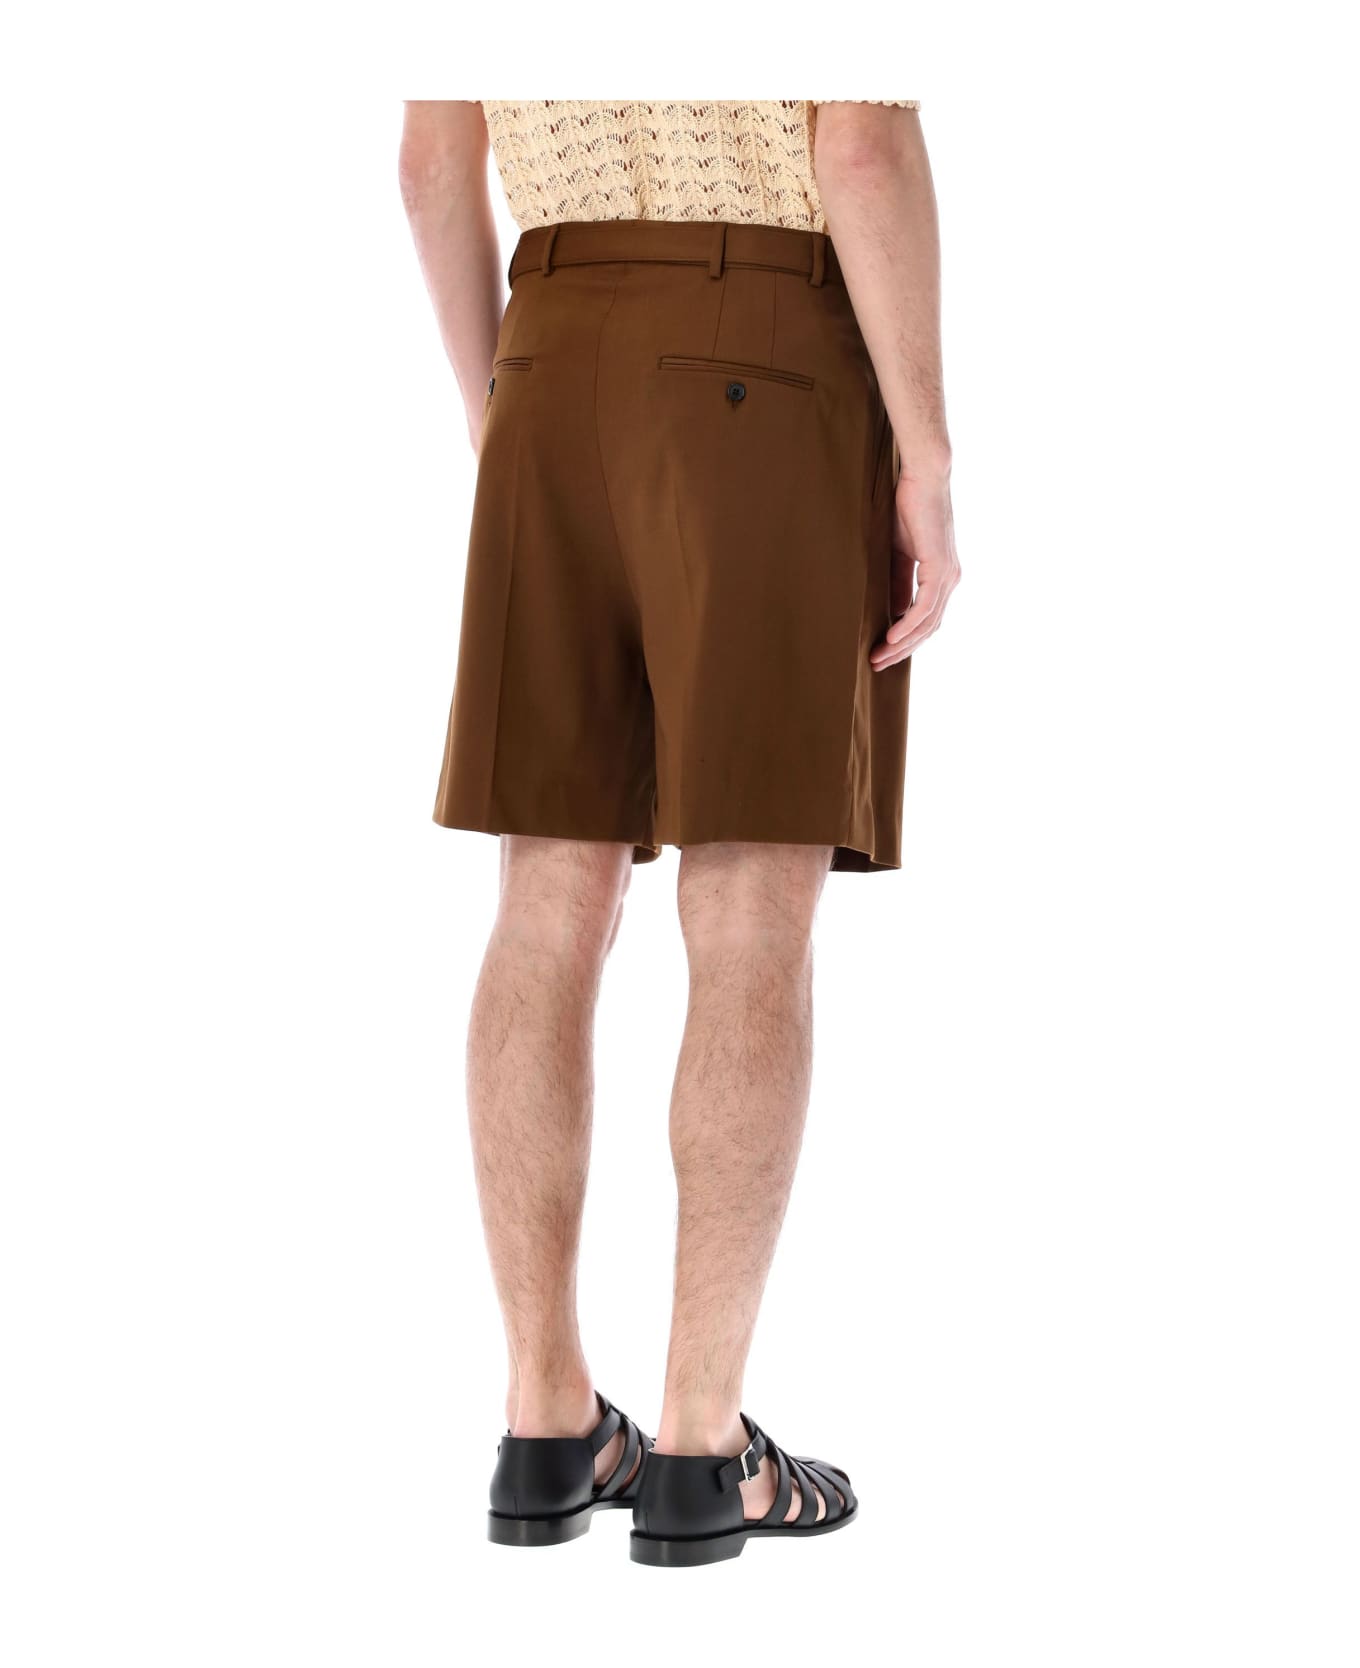 CMMN SWDN Marshall Pleated Shorts - BROWN